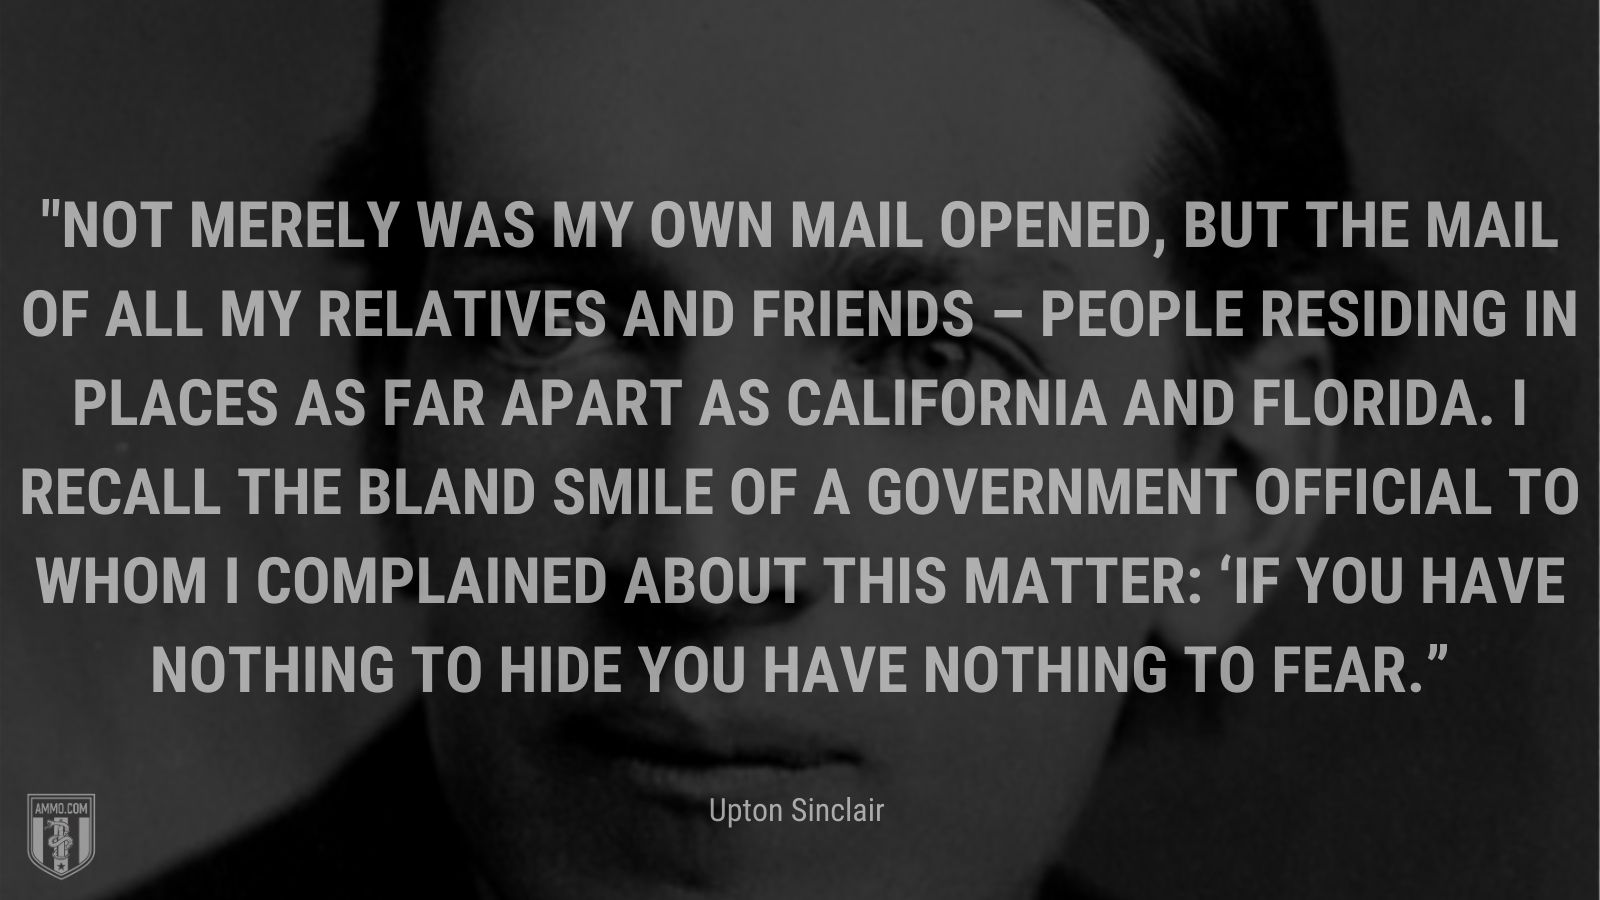 “Not merely was my own mail opened, but the mail of all my relatives and friends – people residing in places as far apart as California and Florida. I recall the bland smile of a government official to whom I complained about this matter: ‘If you have nothing to hide you have nothing to fear.’” - Upton Sinclair